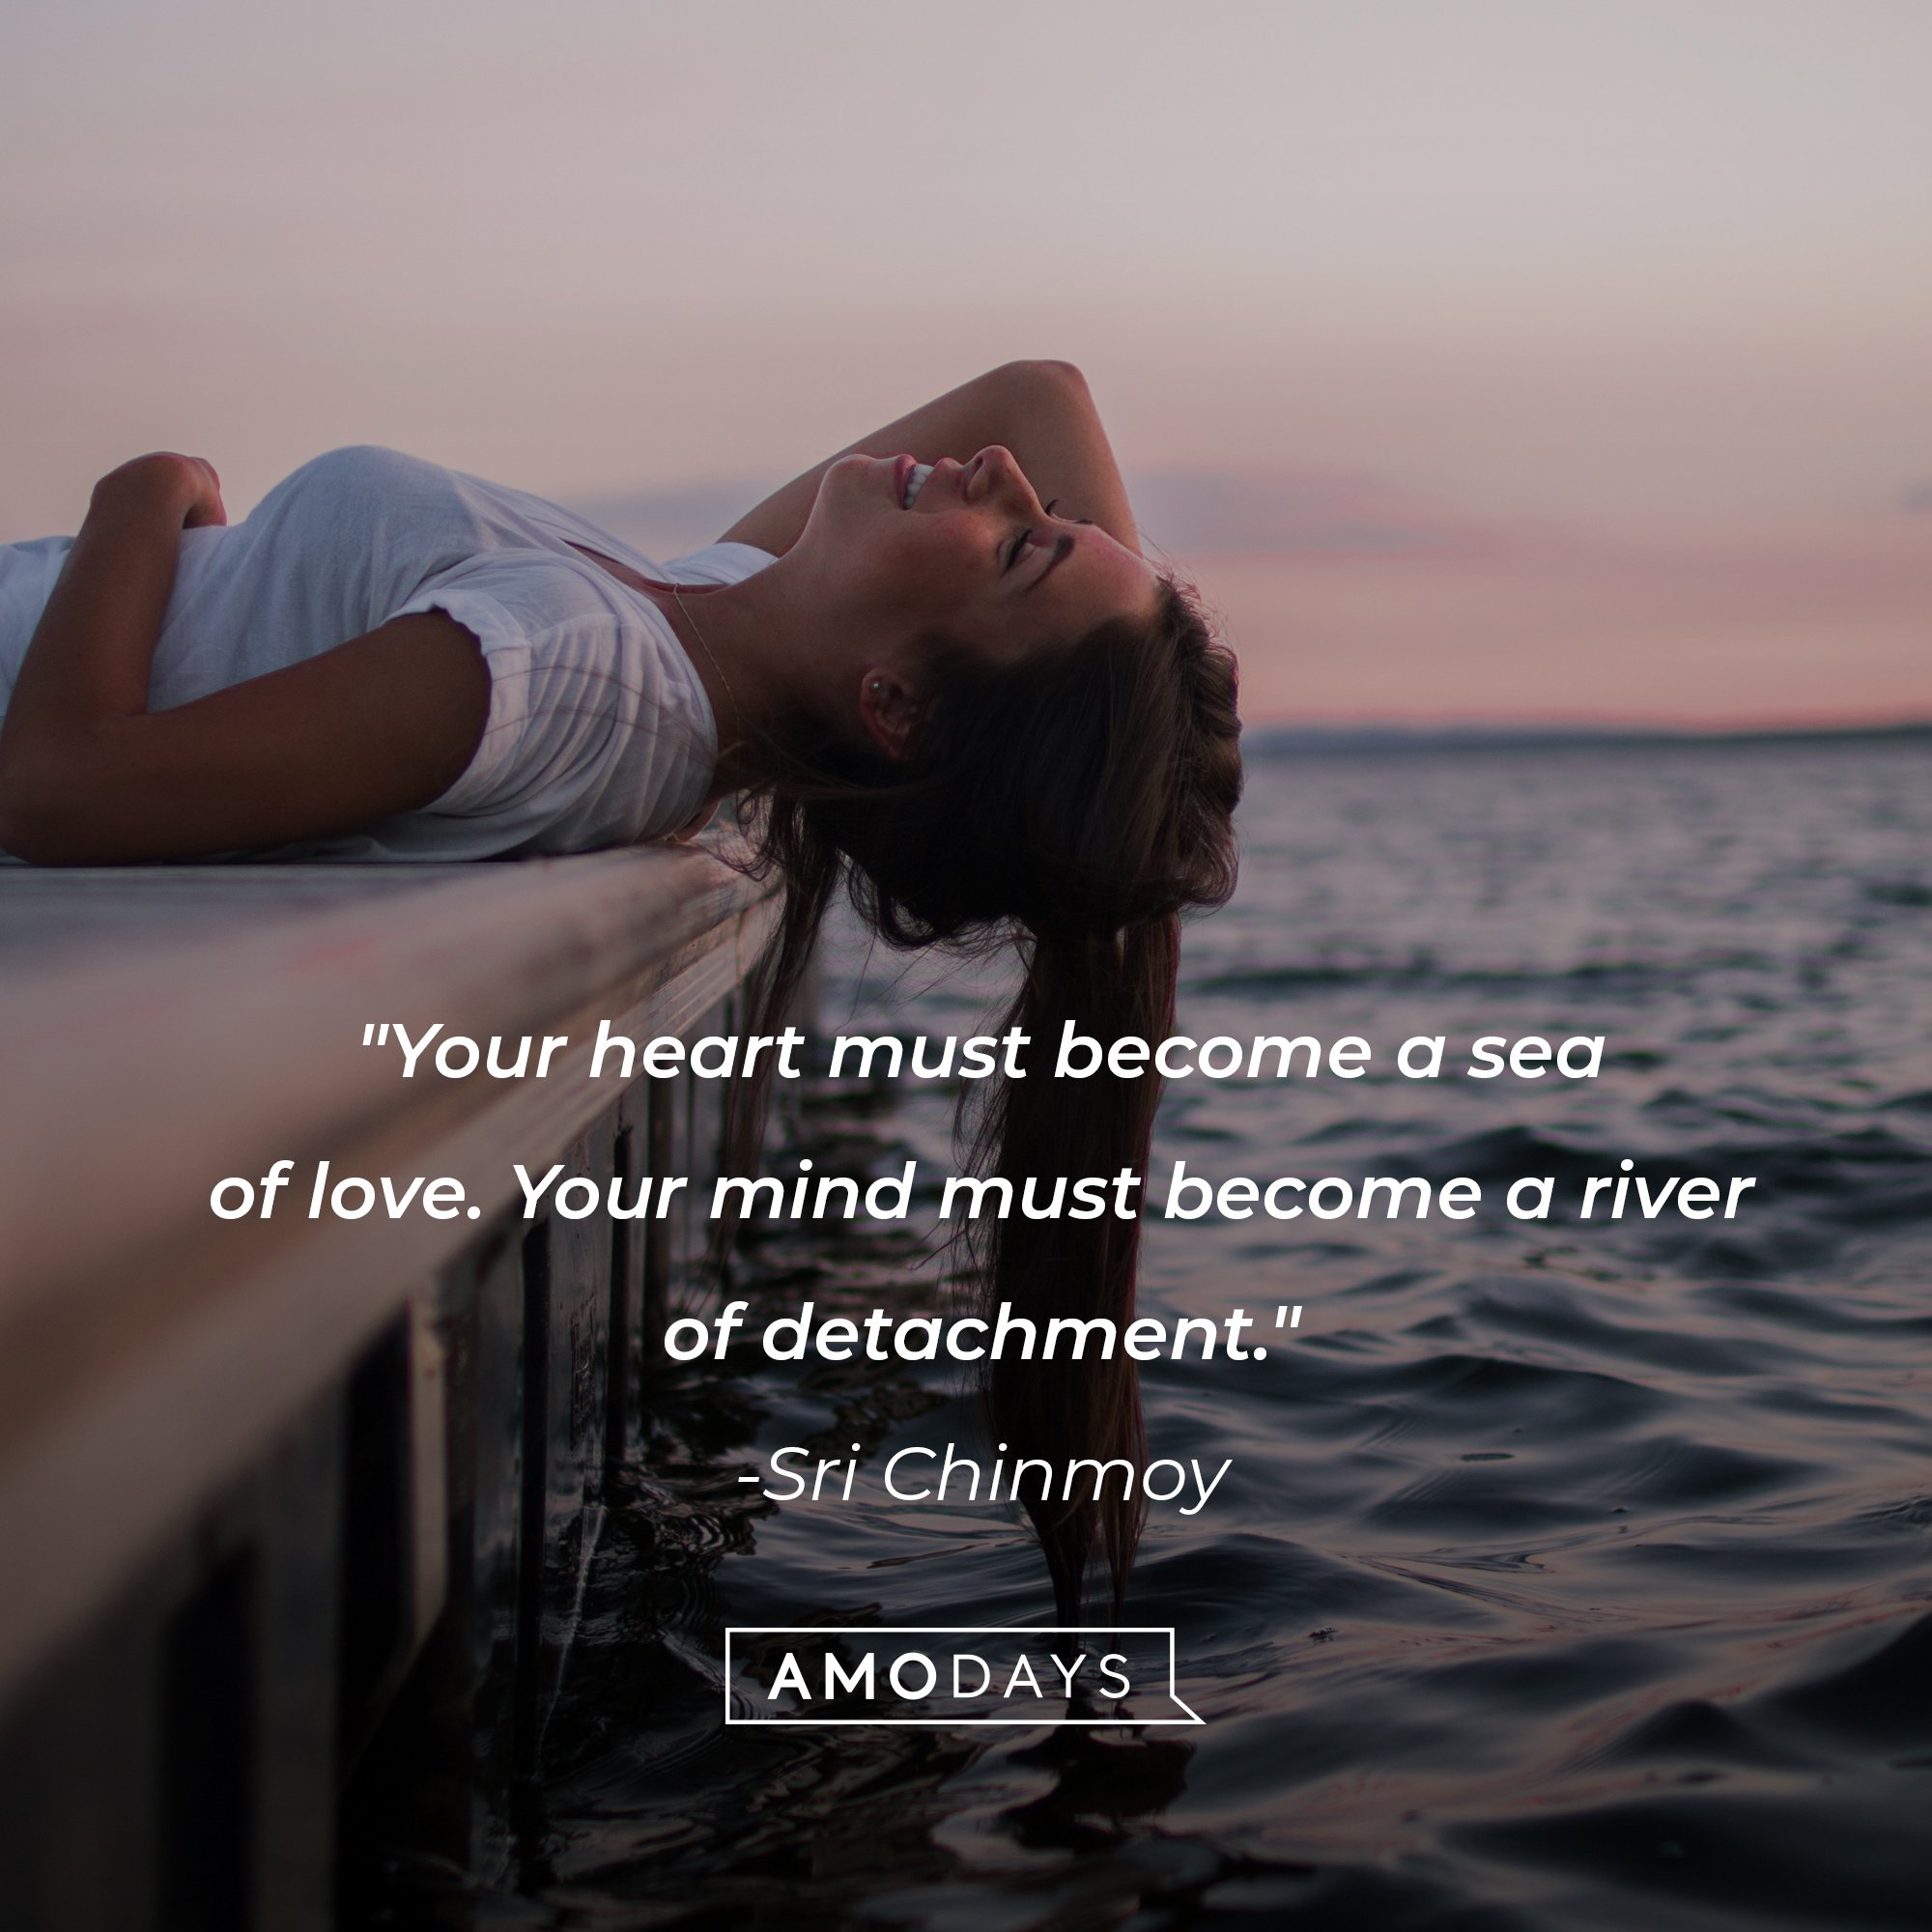 Sri Chinmoy's quote: "Your heart must become a sea of love. Your mind must become a river of detachment." | Image: AmoDays